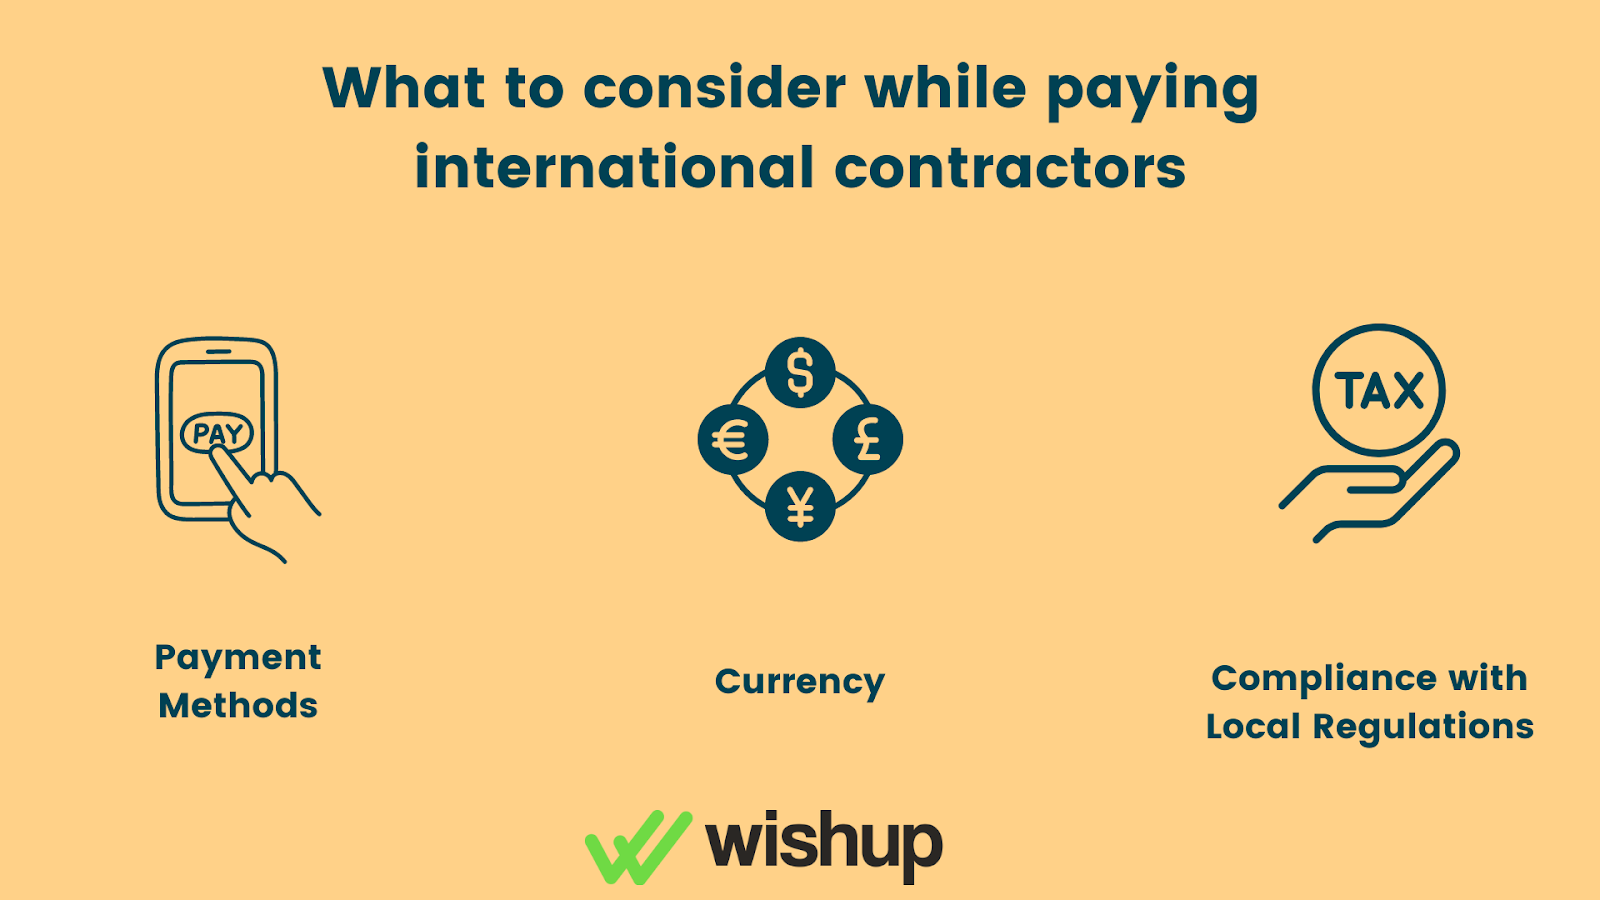 What to consider while paying 
international contractors